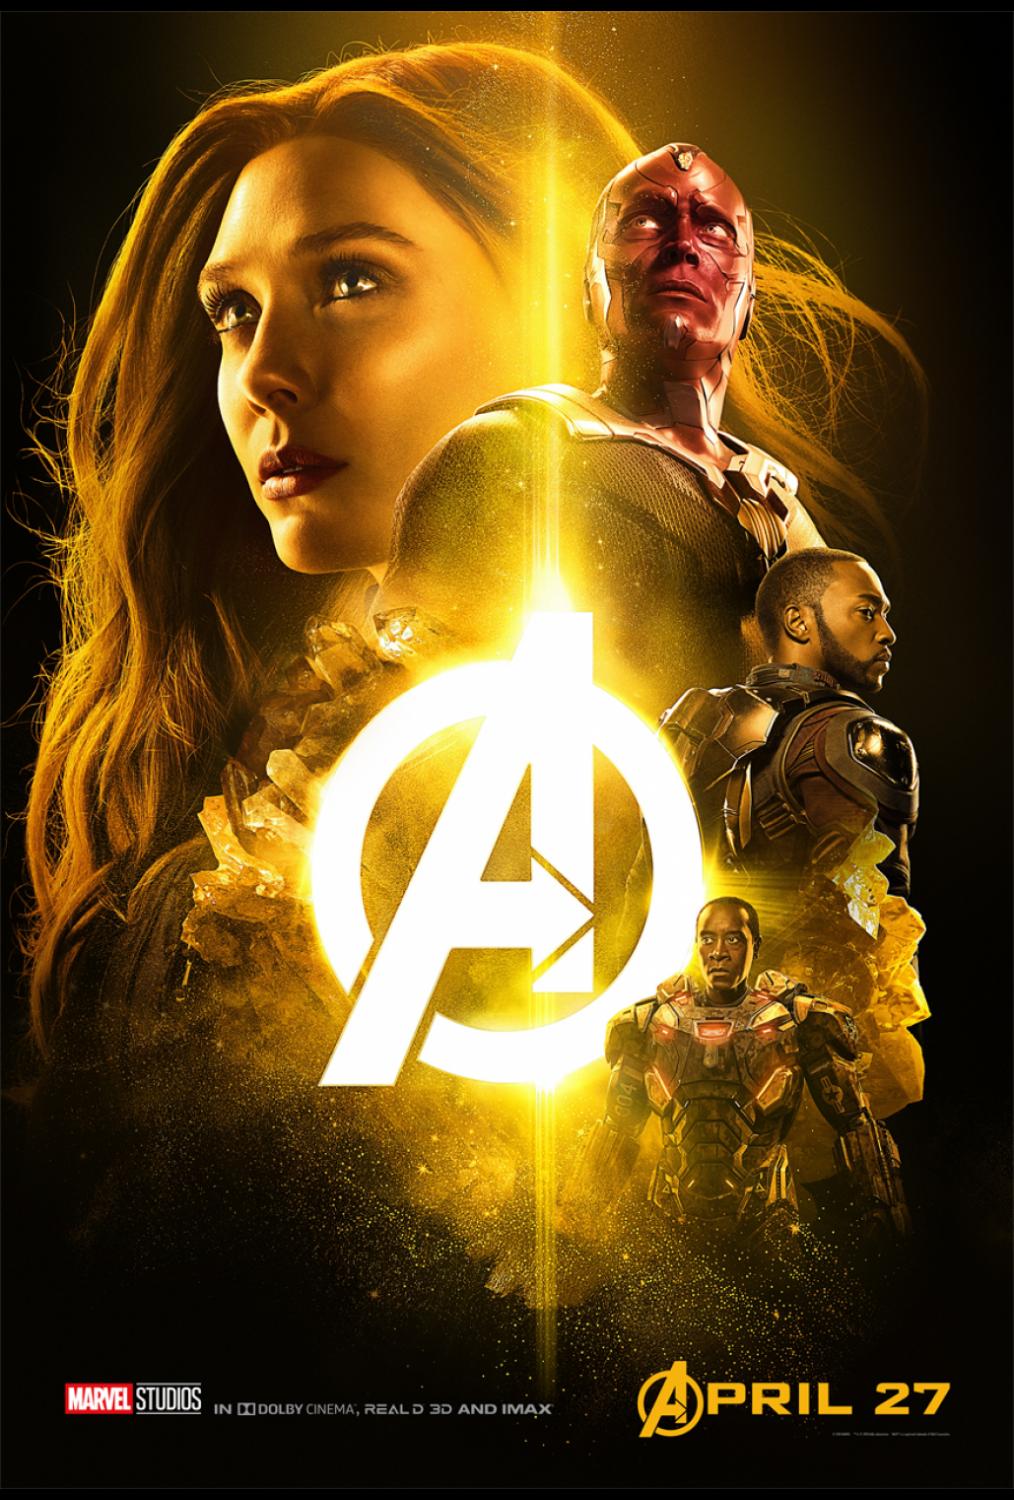  Avengers Infinity War Character Posters